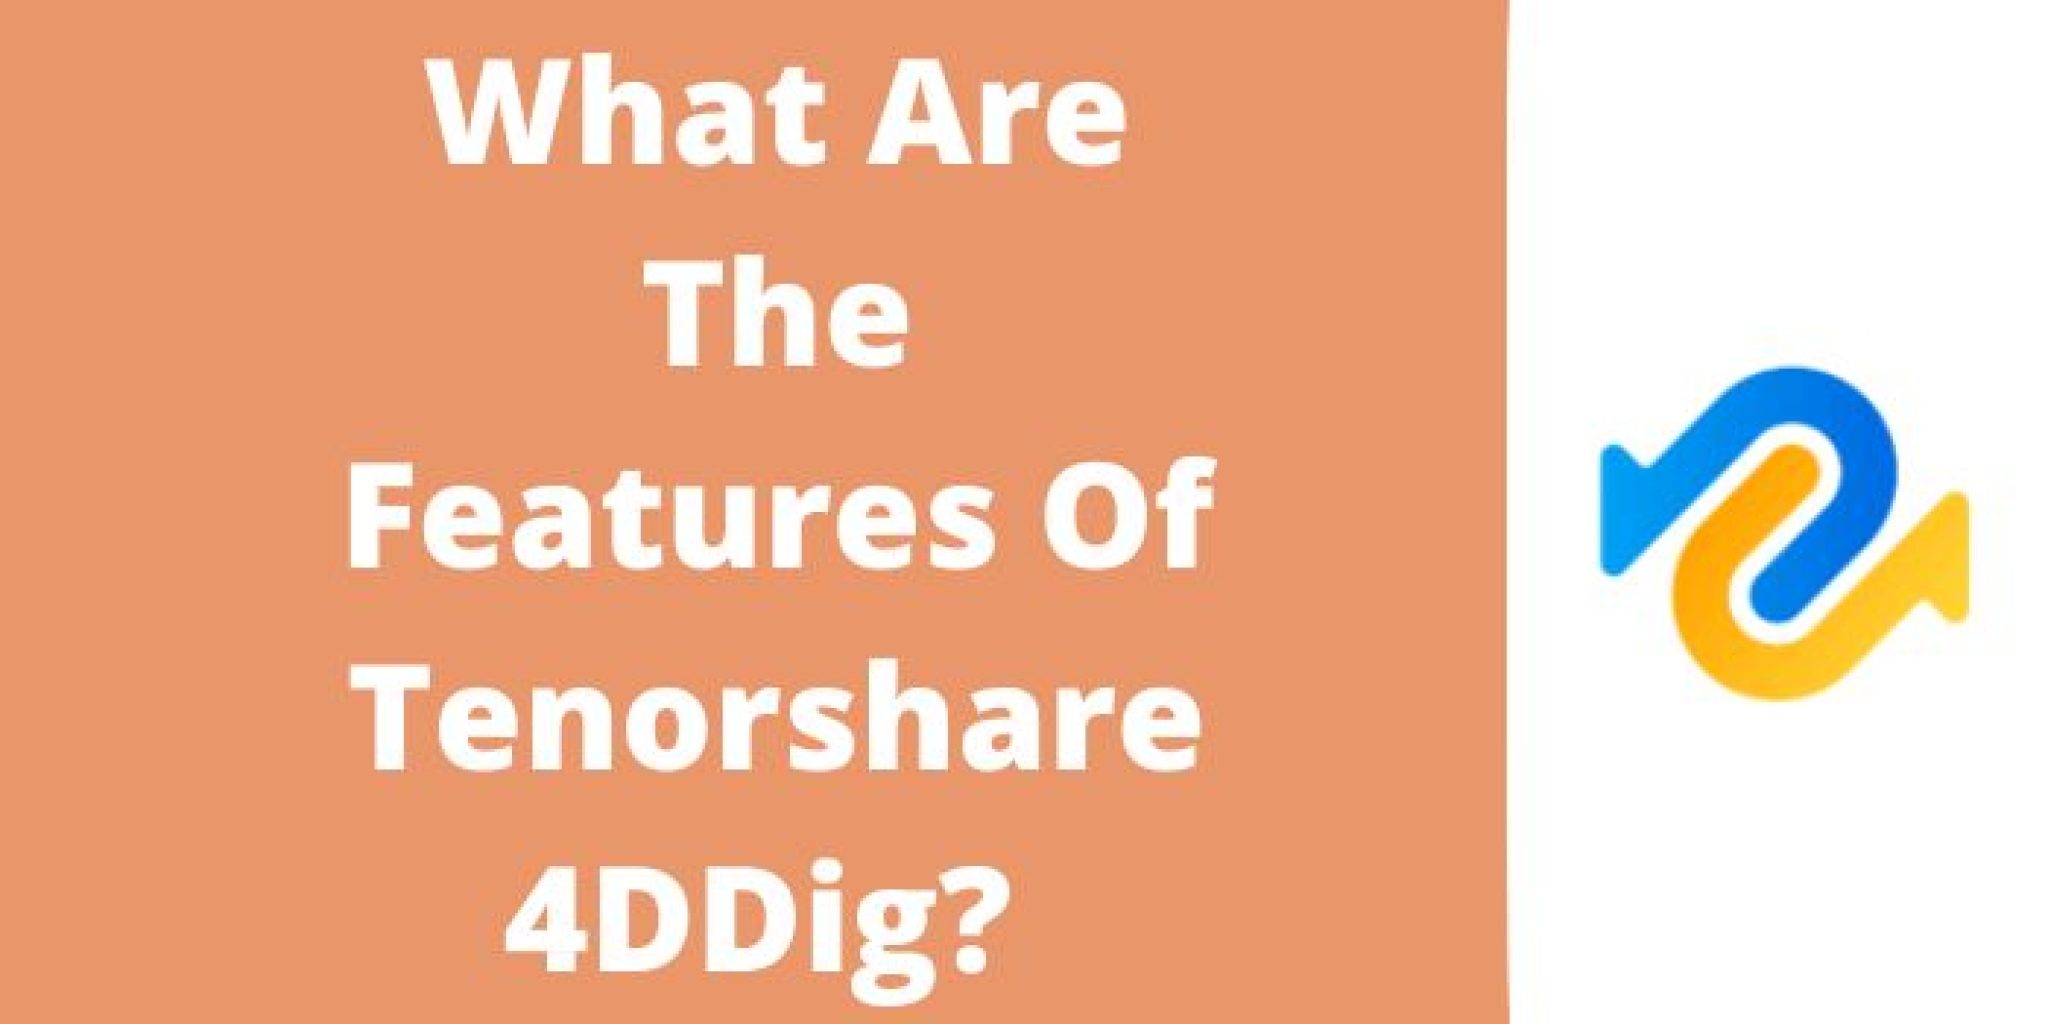 for apple download Tenorshare 4DDiG 9.7.2.6